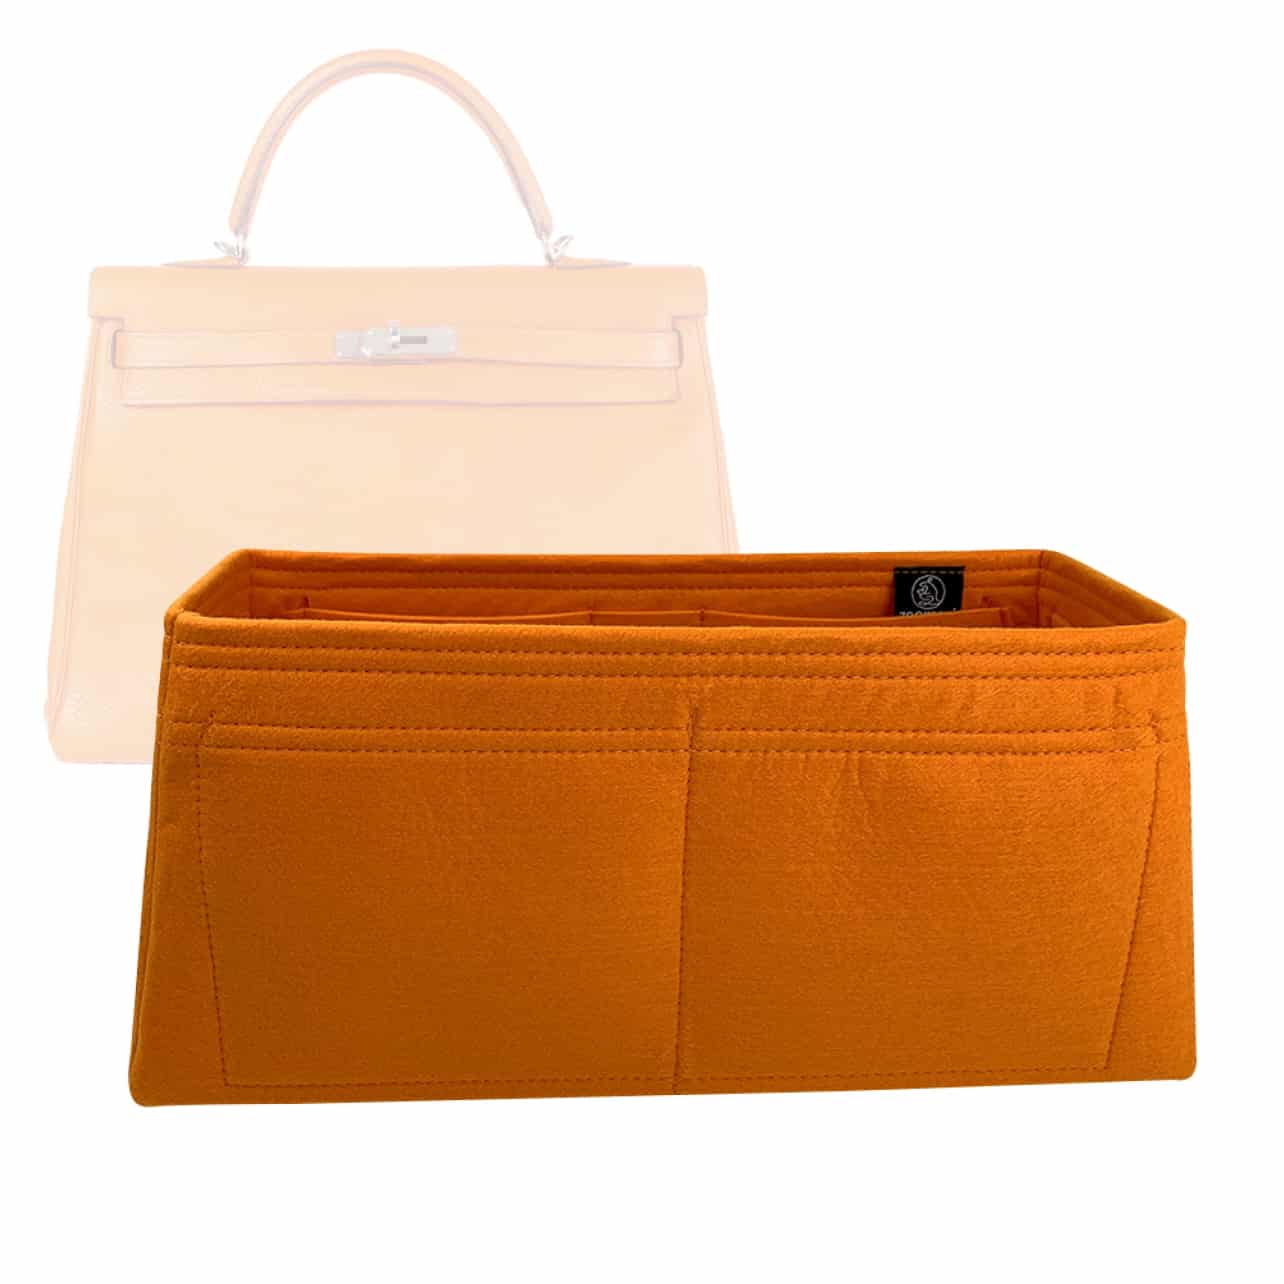  Zoomoni Premium Organizer for Birkin, Kelly, Picotin, Evelyn,  Garden Party, Lindy, Herbag, Bolide, Toolbox, Victoria, Halzan, and More  (Bag Liner,Organiser,Shaper,Insert) (Handmade/20 Colors) : Handmade Products